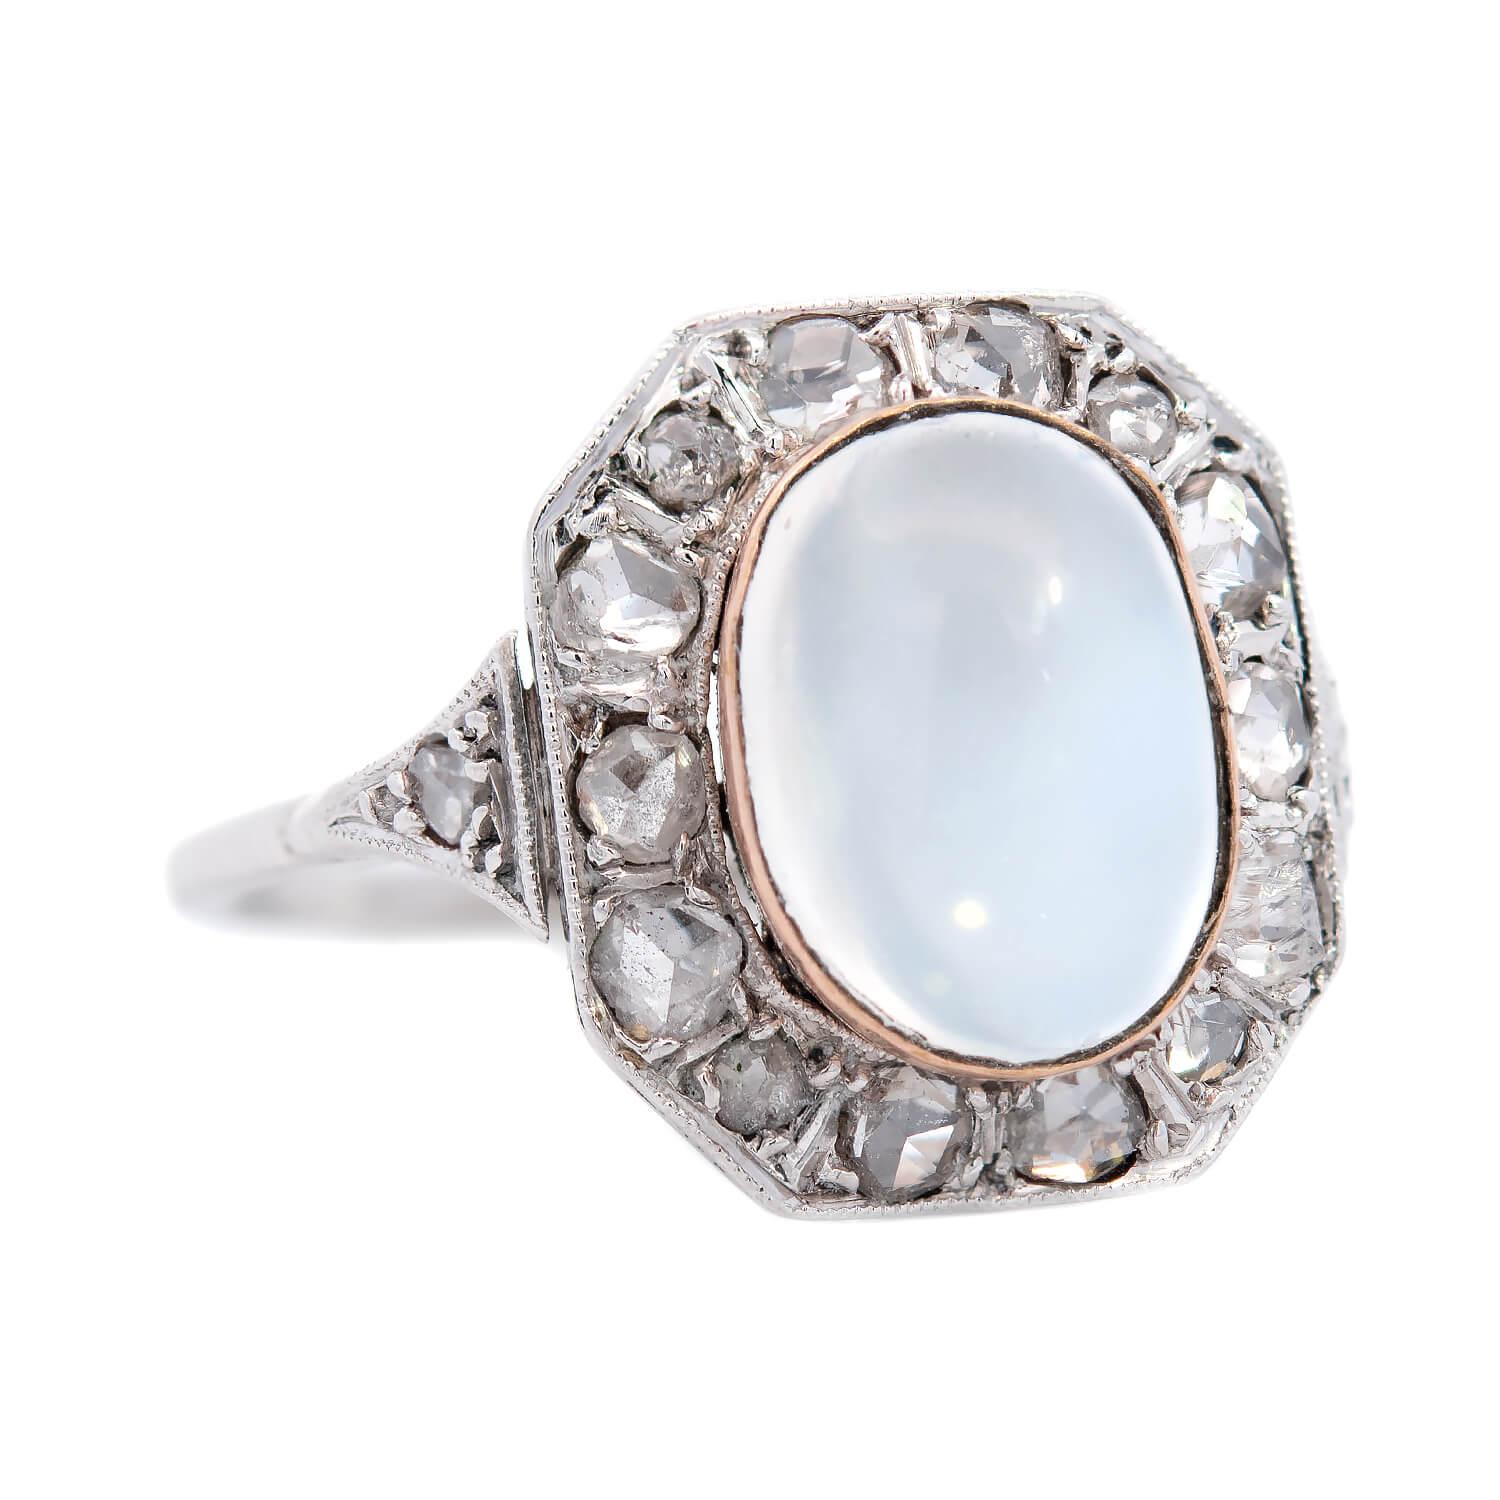 An exquisite moonstone and diamond ring from the Edwardian (ca1910) era! Crafted in  18k white gold with a yellow gold bezel, the silvery-grey moonstone cabochon is surrounded by a halo of 10 old rose cut diamonds, each one bead set in white gold